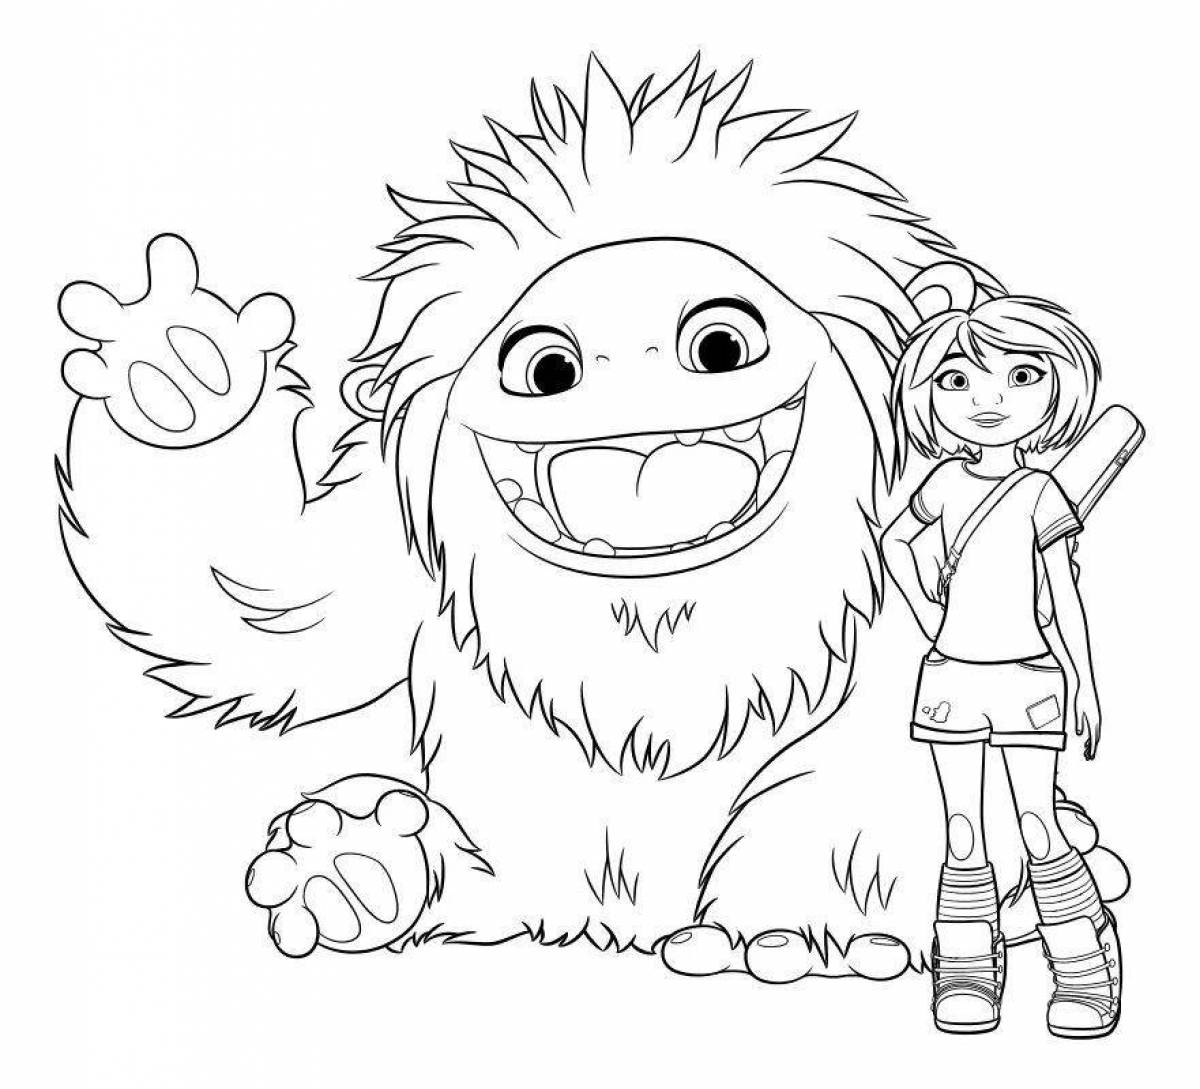 Sparkling date cartoon coloring page